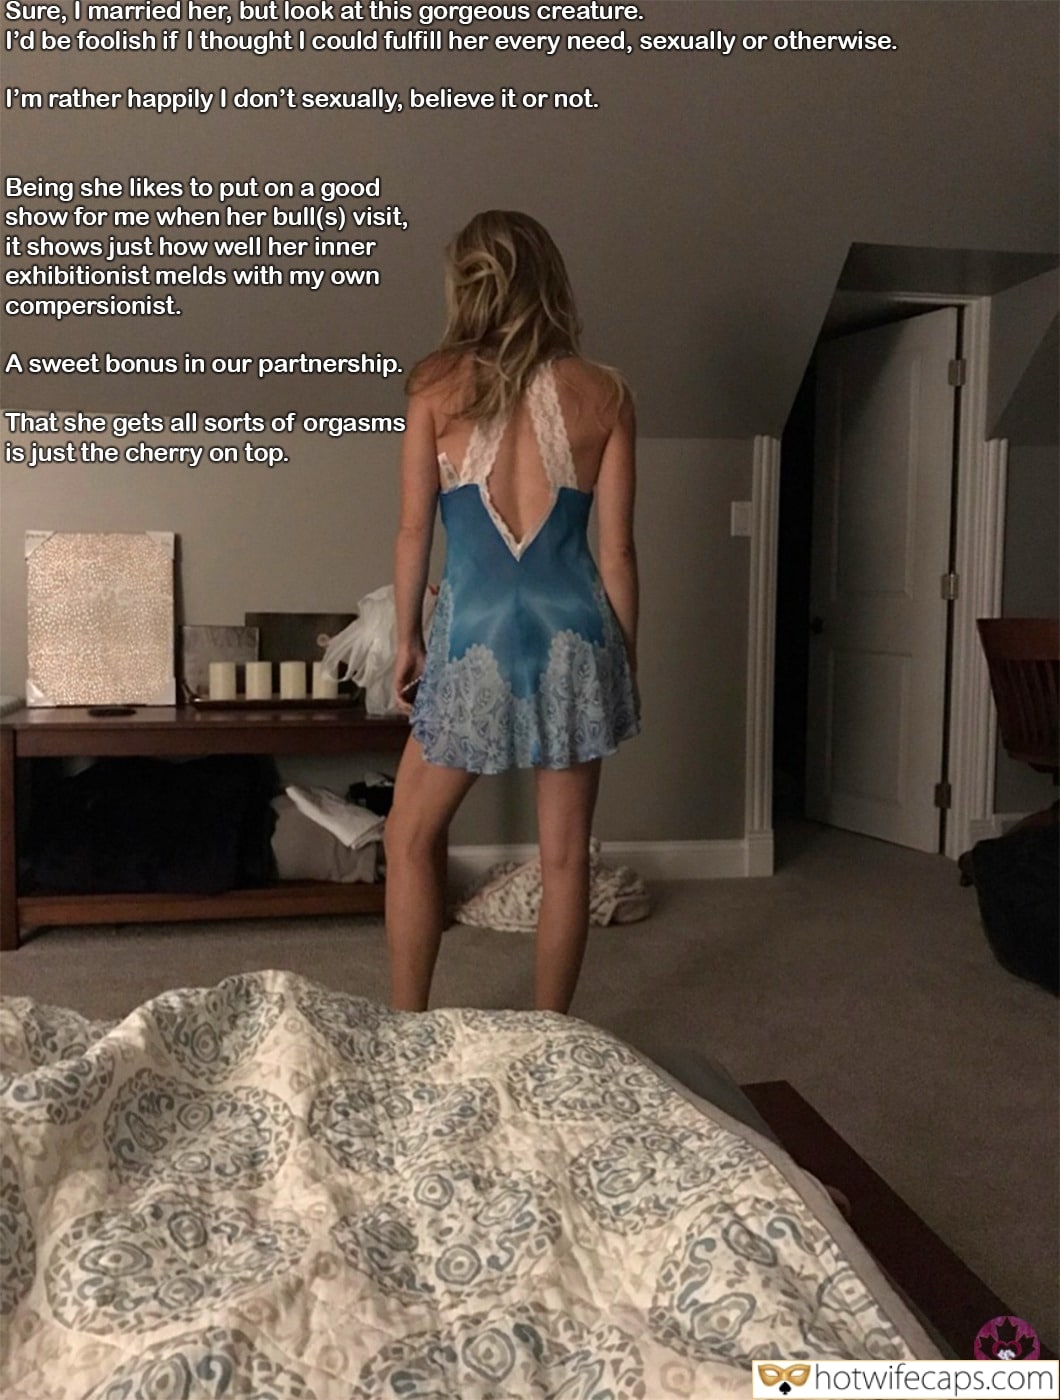 Bull, Bully, Cheating, Cuckold Stories, Sexy Memes Hotwife Caption №565134 home dress for meeting guests picture